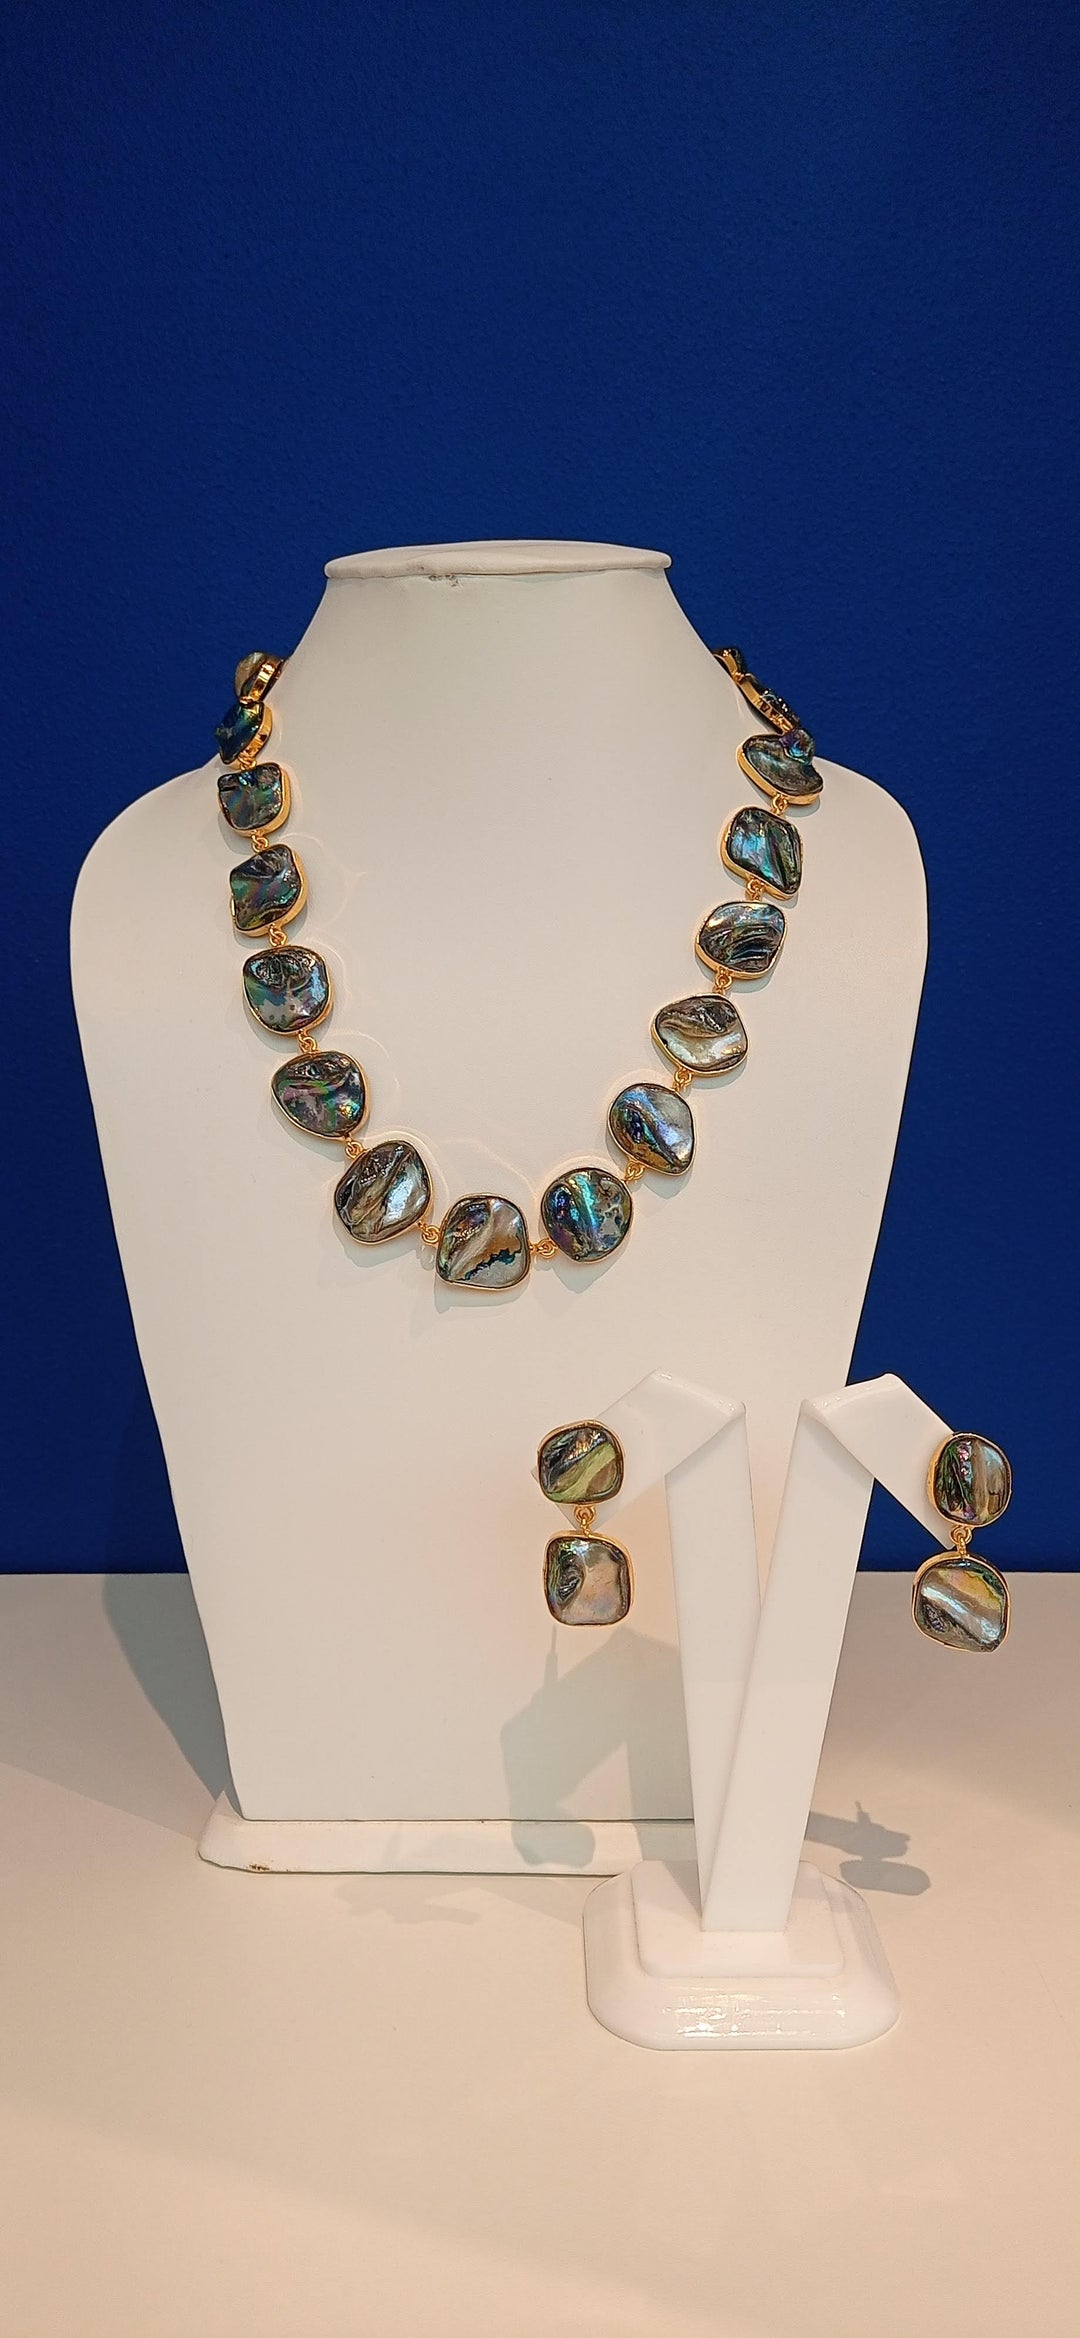 The "Olessia" Grey Opal Necklace and Earrings Set